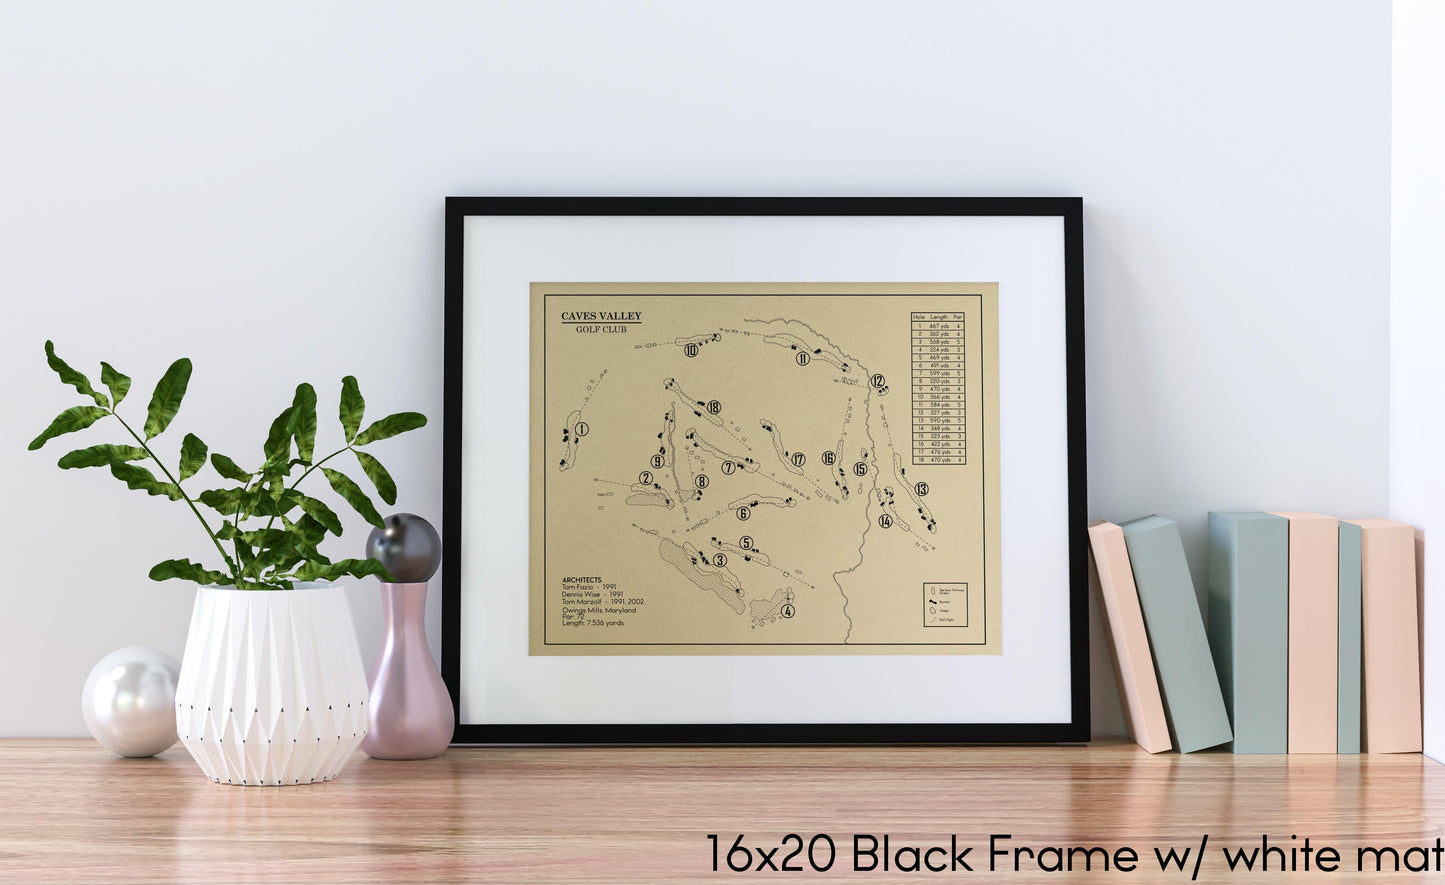 Caves Valley Golf Club Outline (Print)